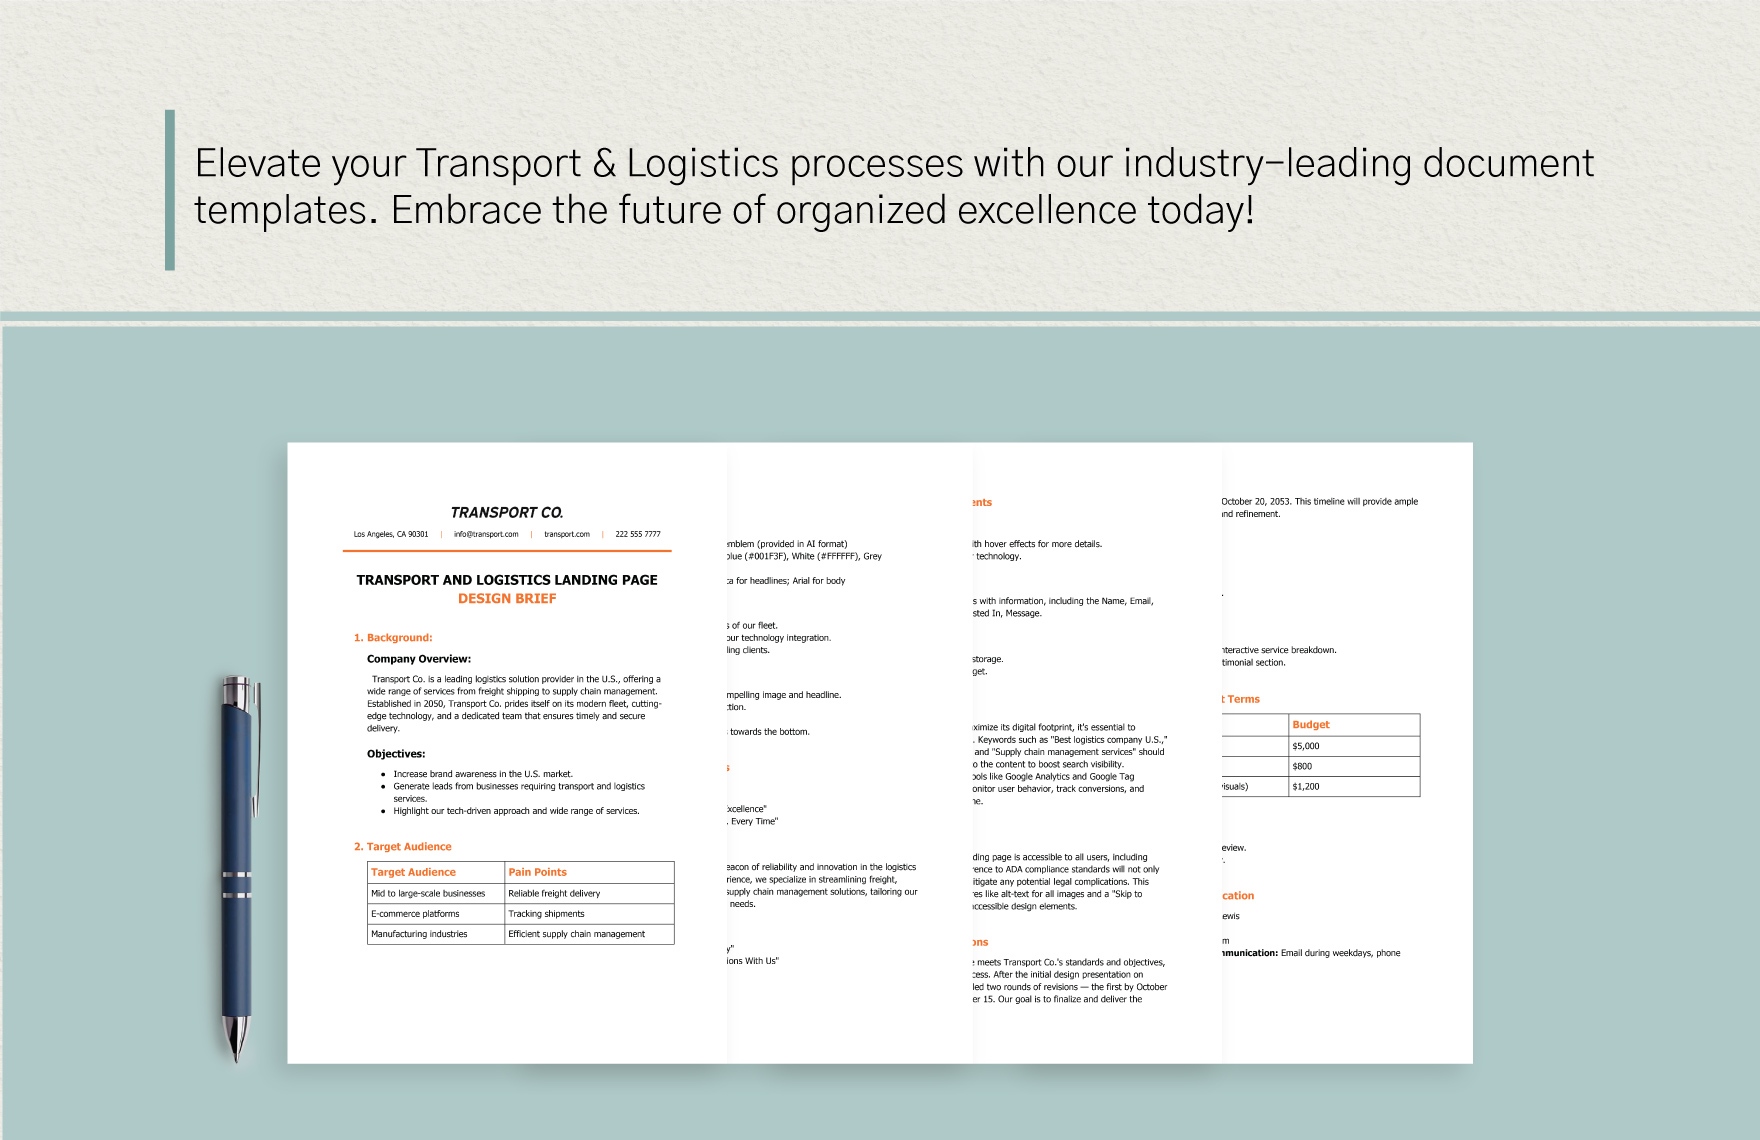 Transport and Logistics Landing Page Design Brief Template